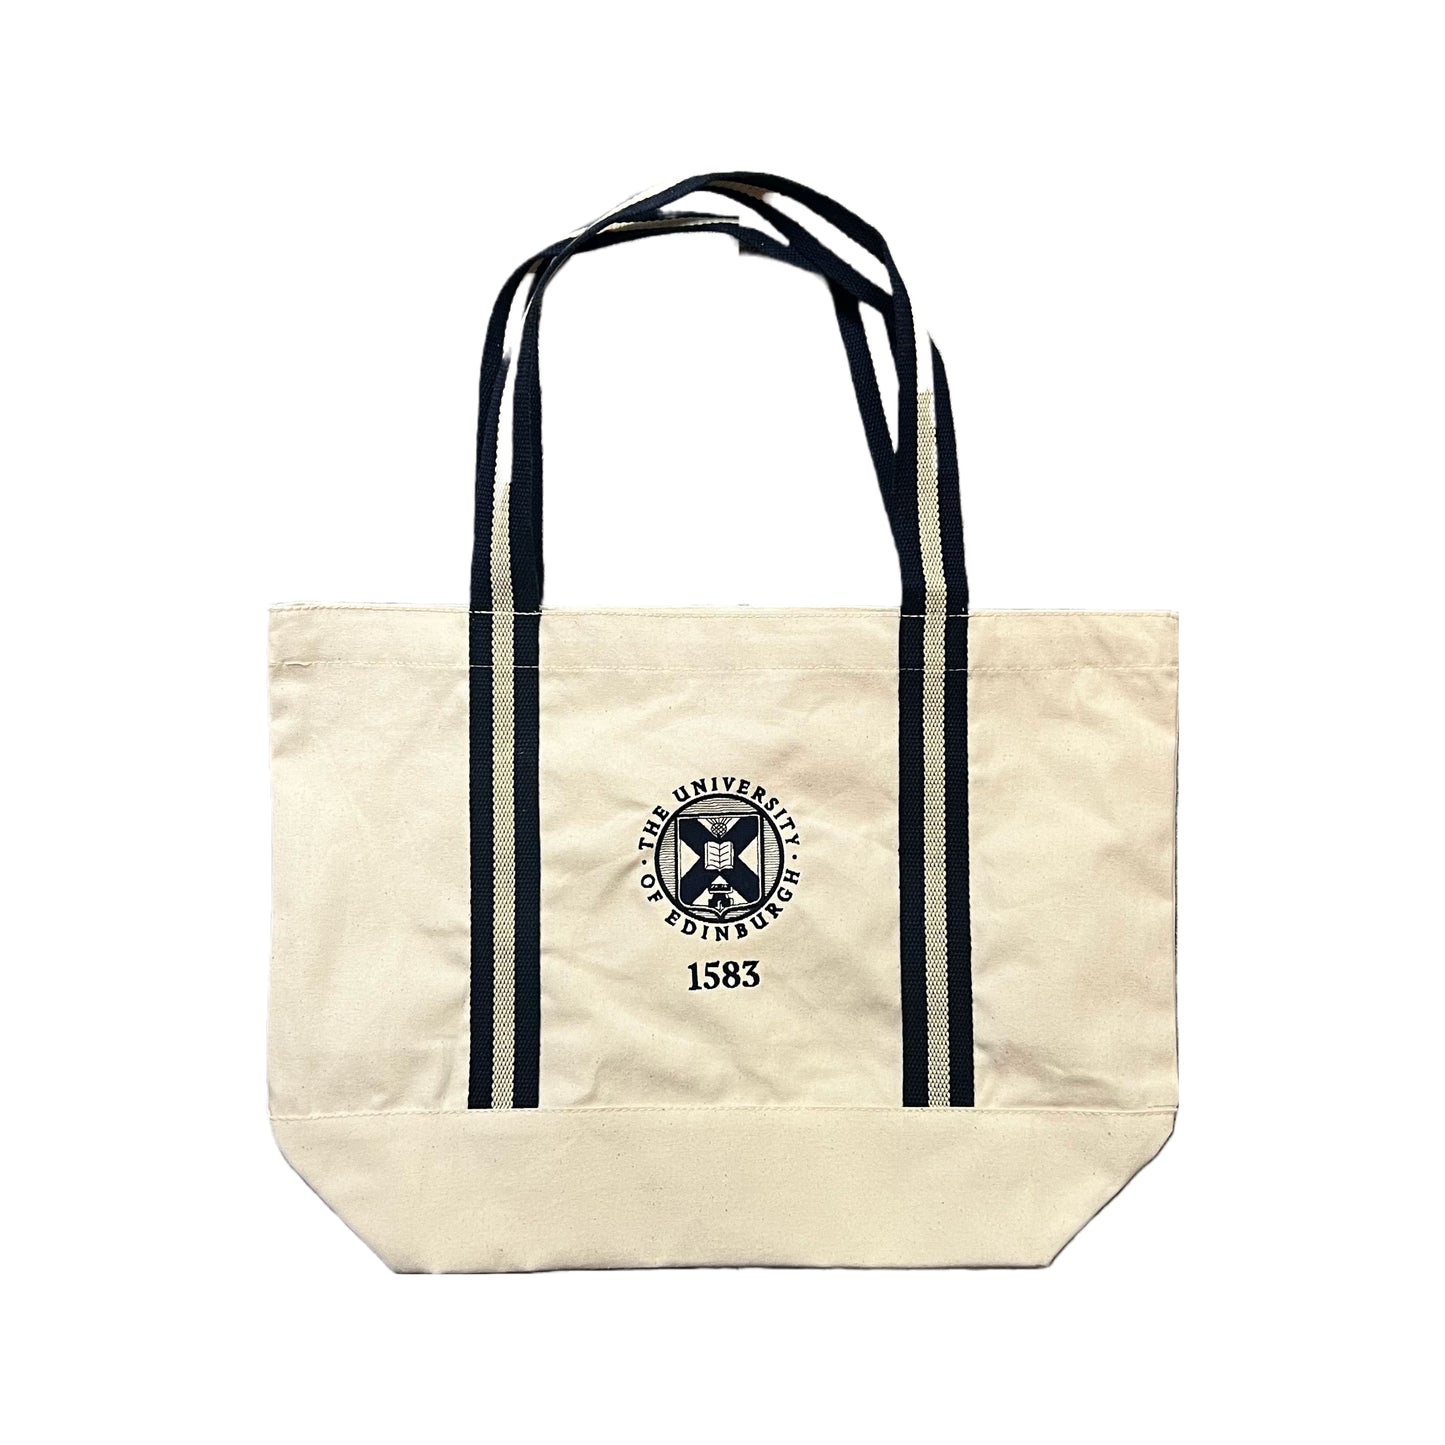 Boat Tote Bag -Navy striped handles and University Crest in centre with Navy colouring. Cotton/Canvas type material